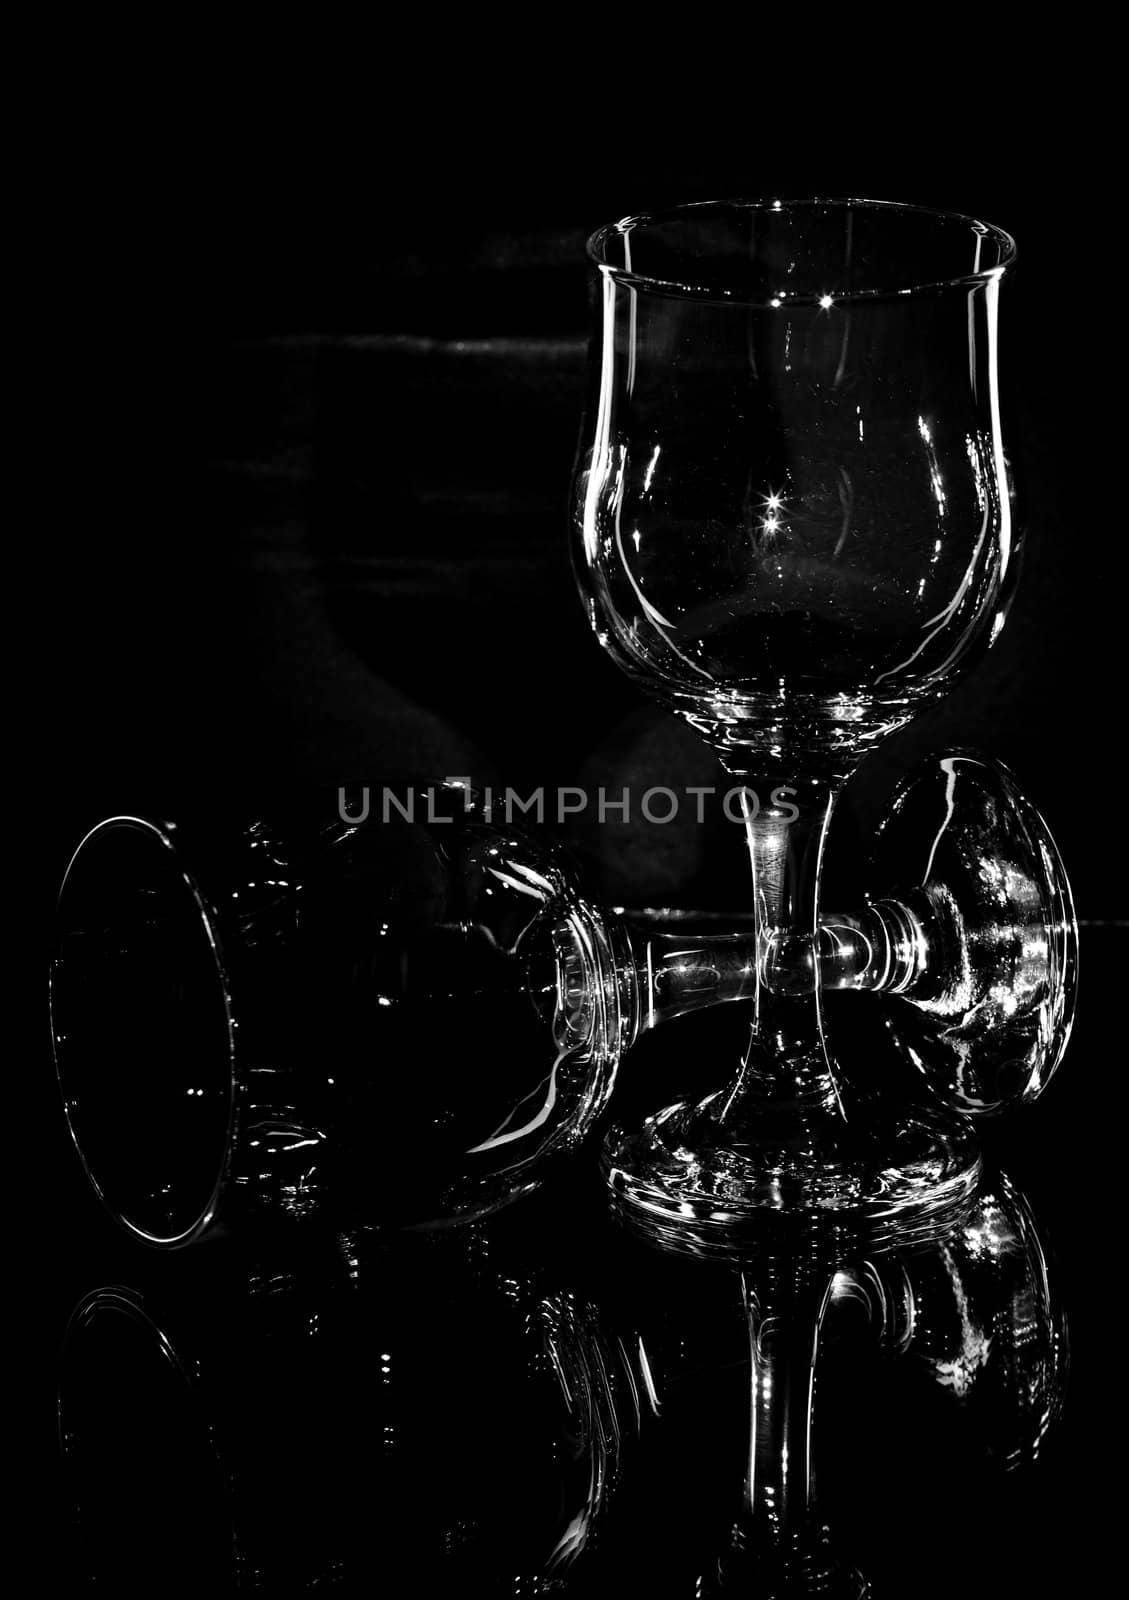 Wine glasses on a black background by selinsmo